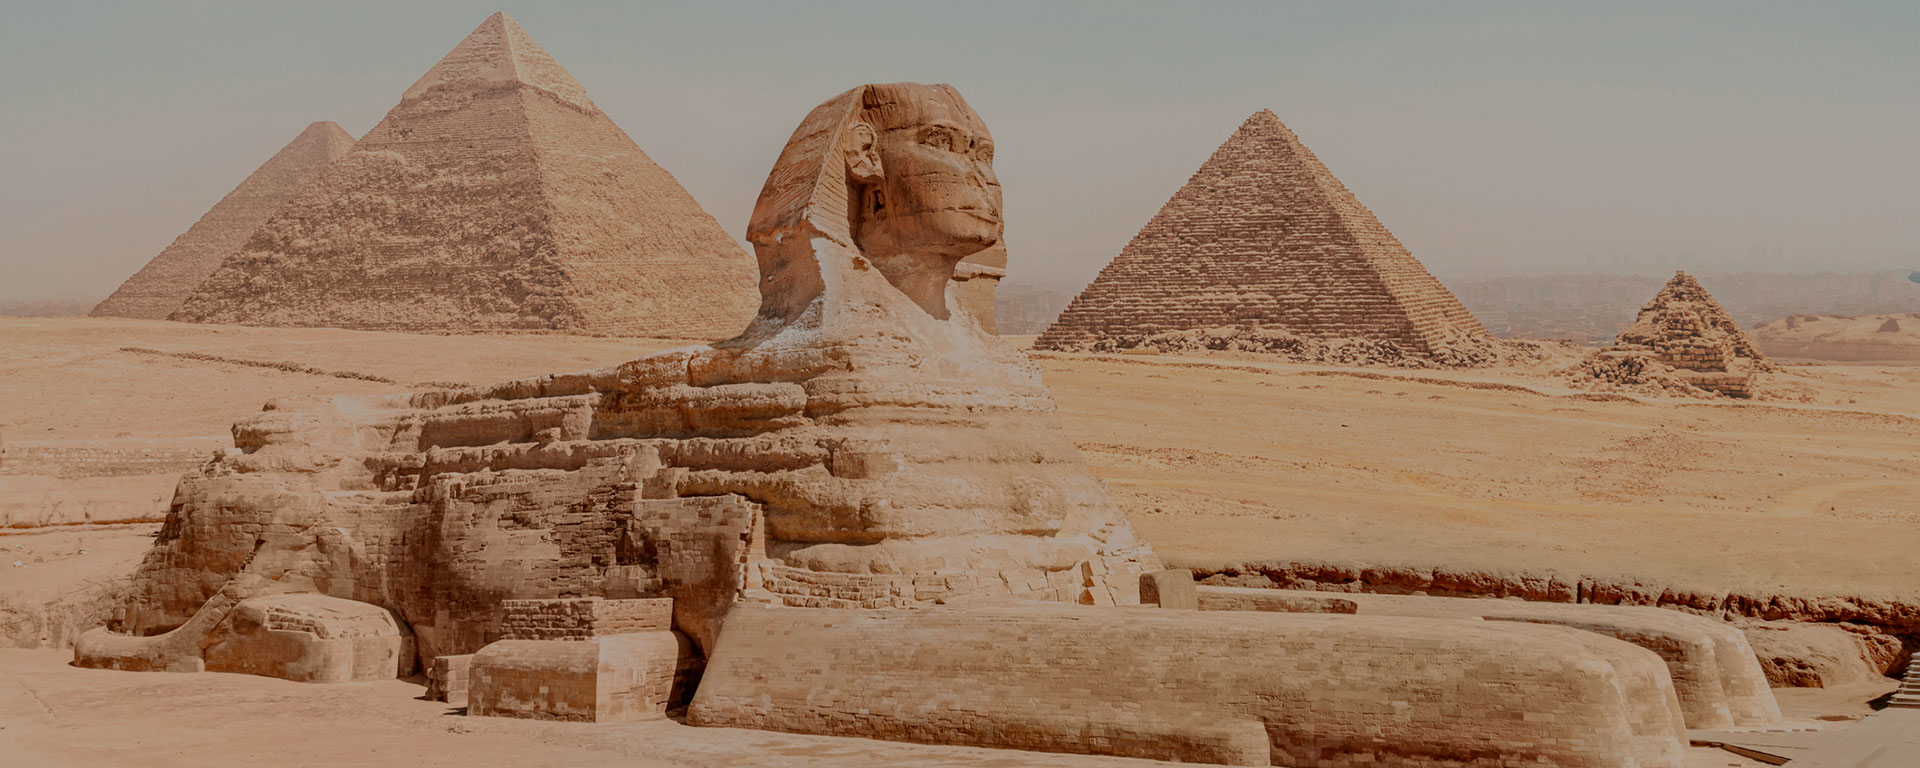 The Great Sphinx in Cairo, Egypt